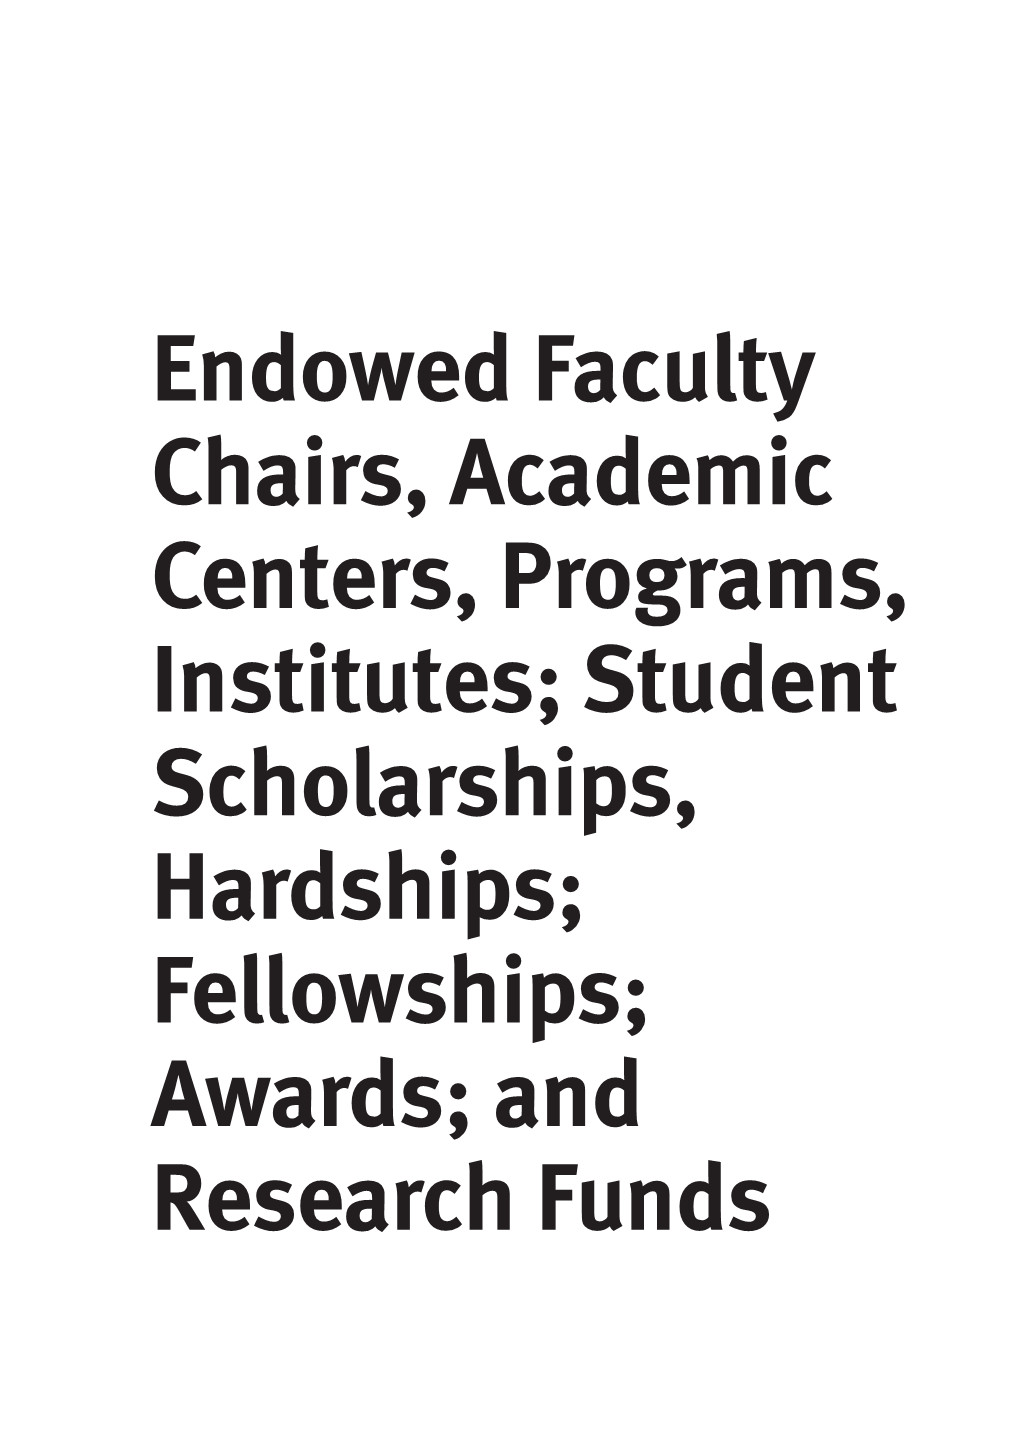 Endowed Faculty Chairs, Academic Centers, Programs, Institutes